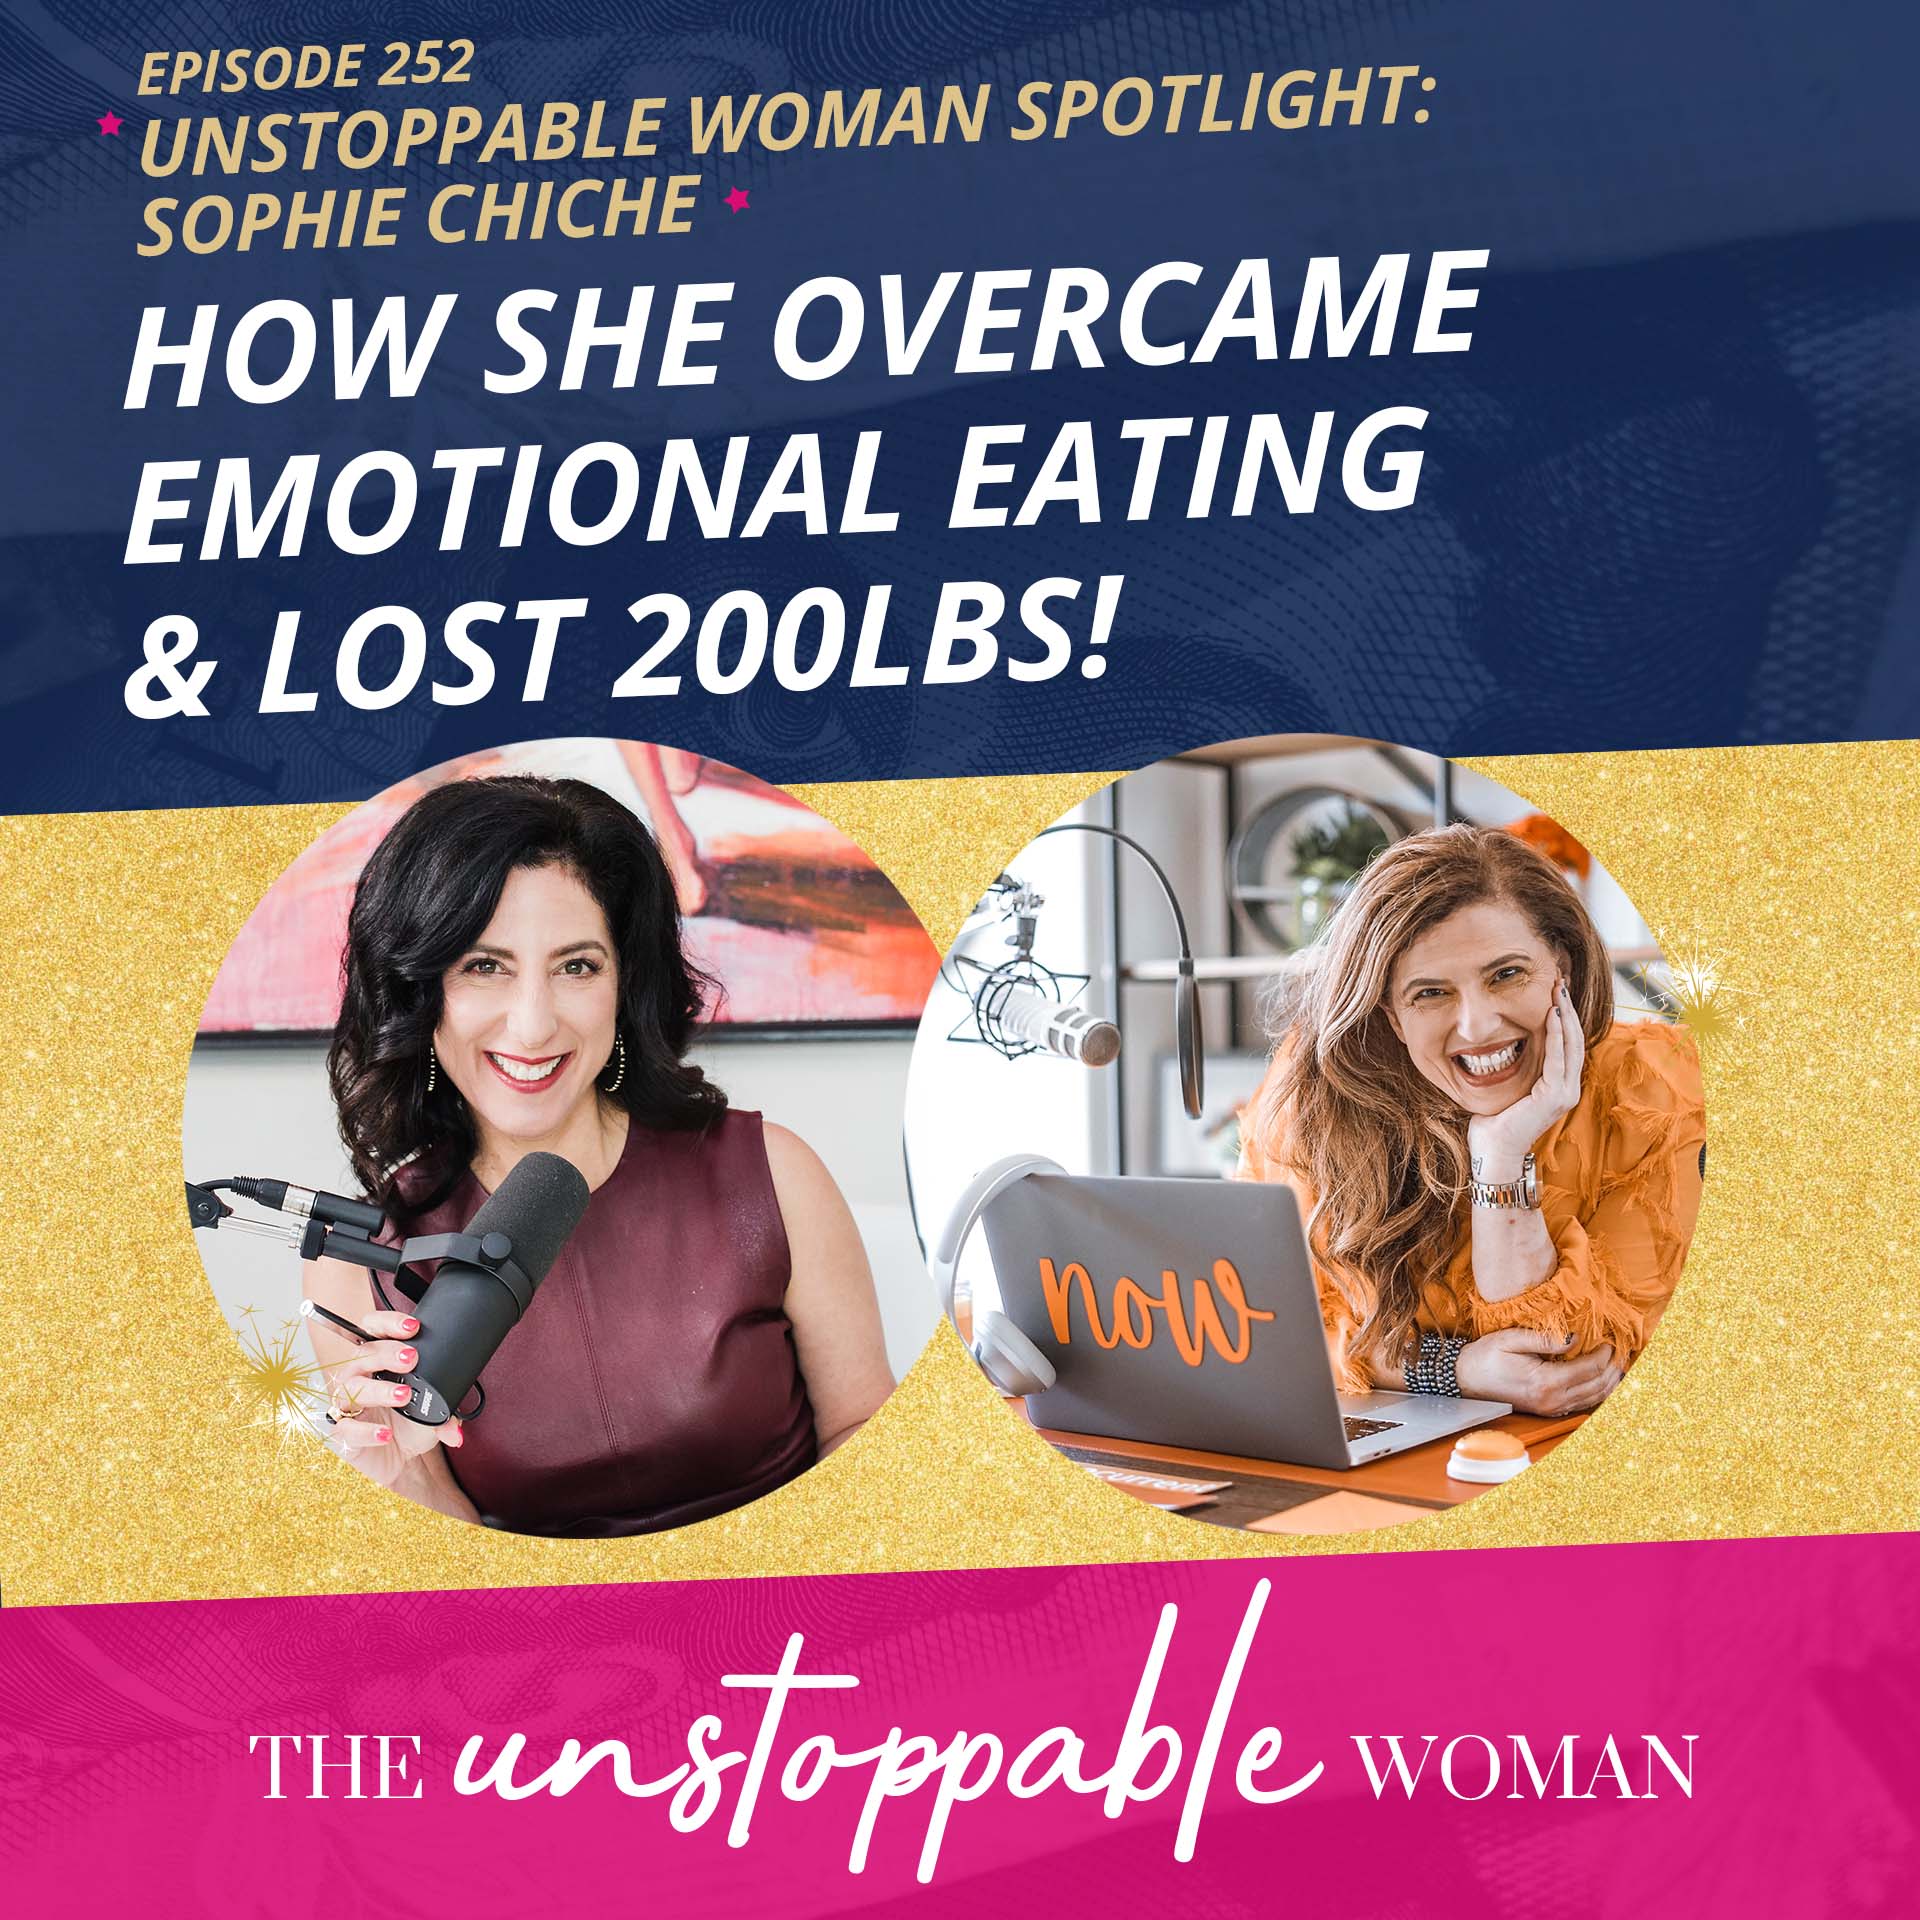 How She Overcame Emotional Eating & Lost 200lbs! | Unstoppable Woman Spotlight | Sophie Chiche